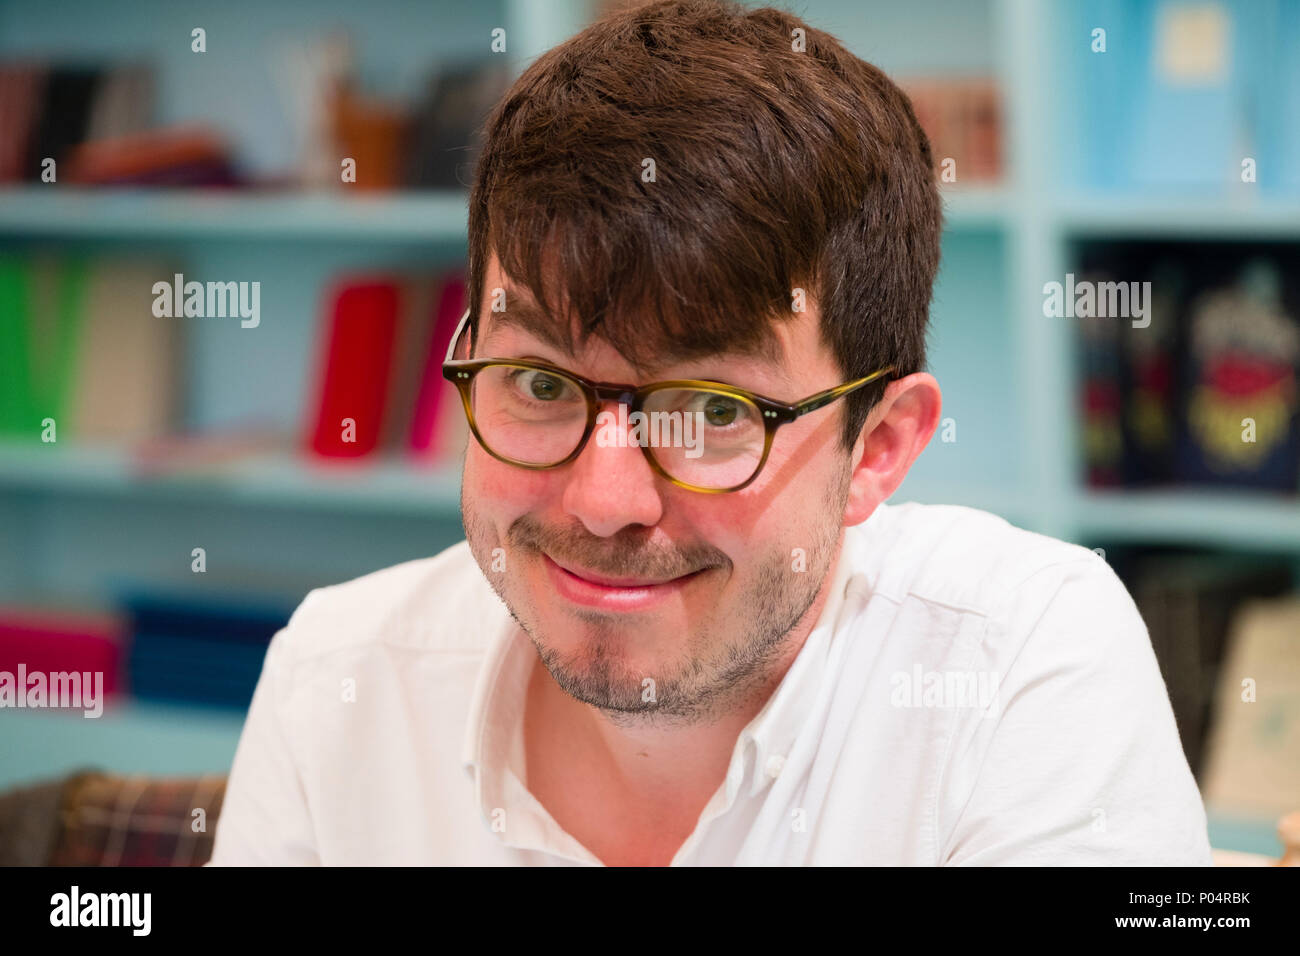 Ross Montgomery - author, novelist, writer of books for children, at the Hay Festival  of Literature and the Arts, May 2018 Stock Photo